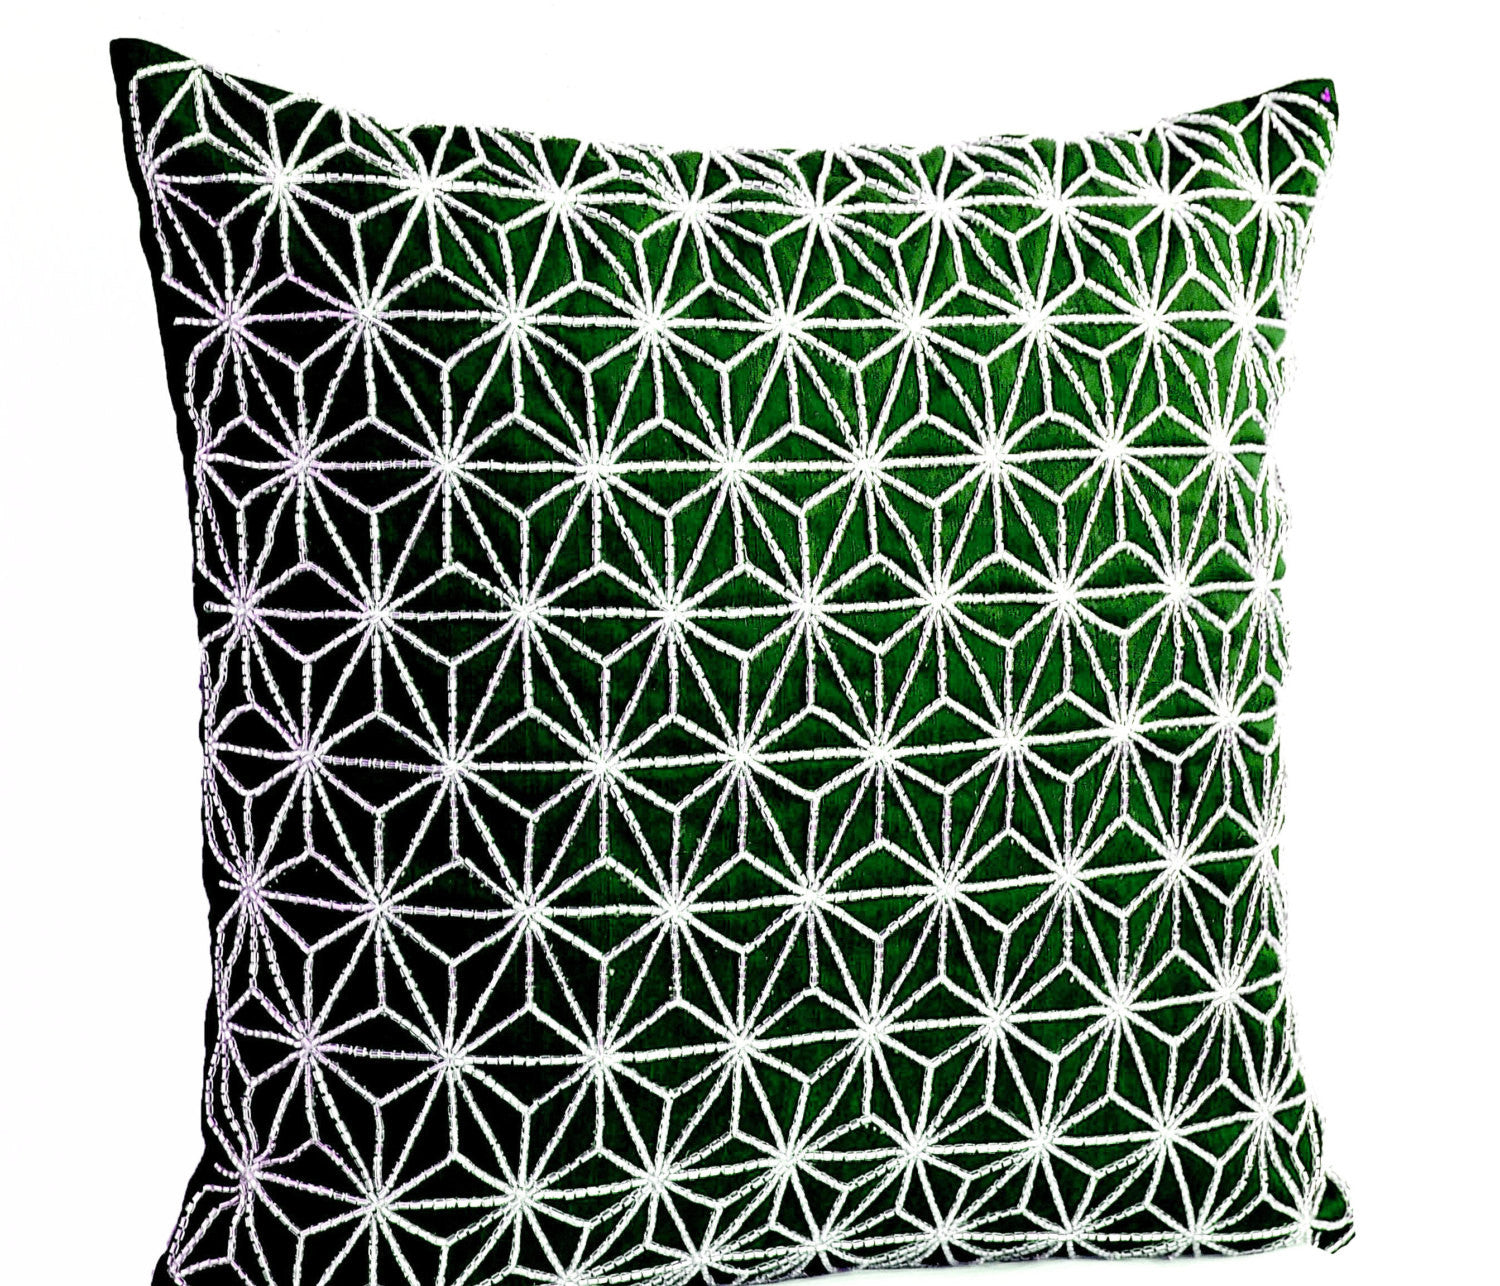 Handmade emerald green throw pillow with embroidered hemp leaf